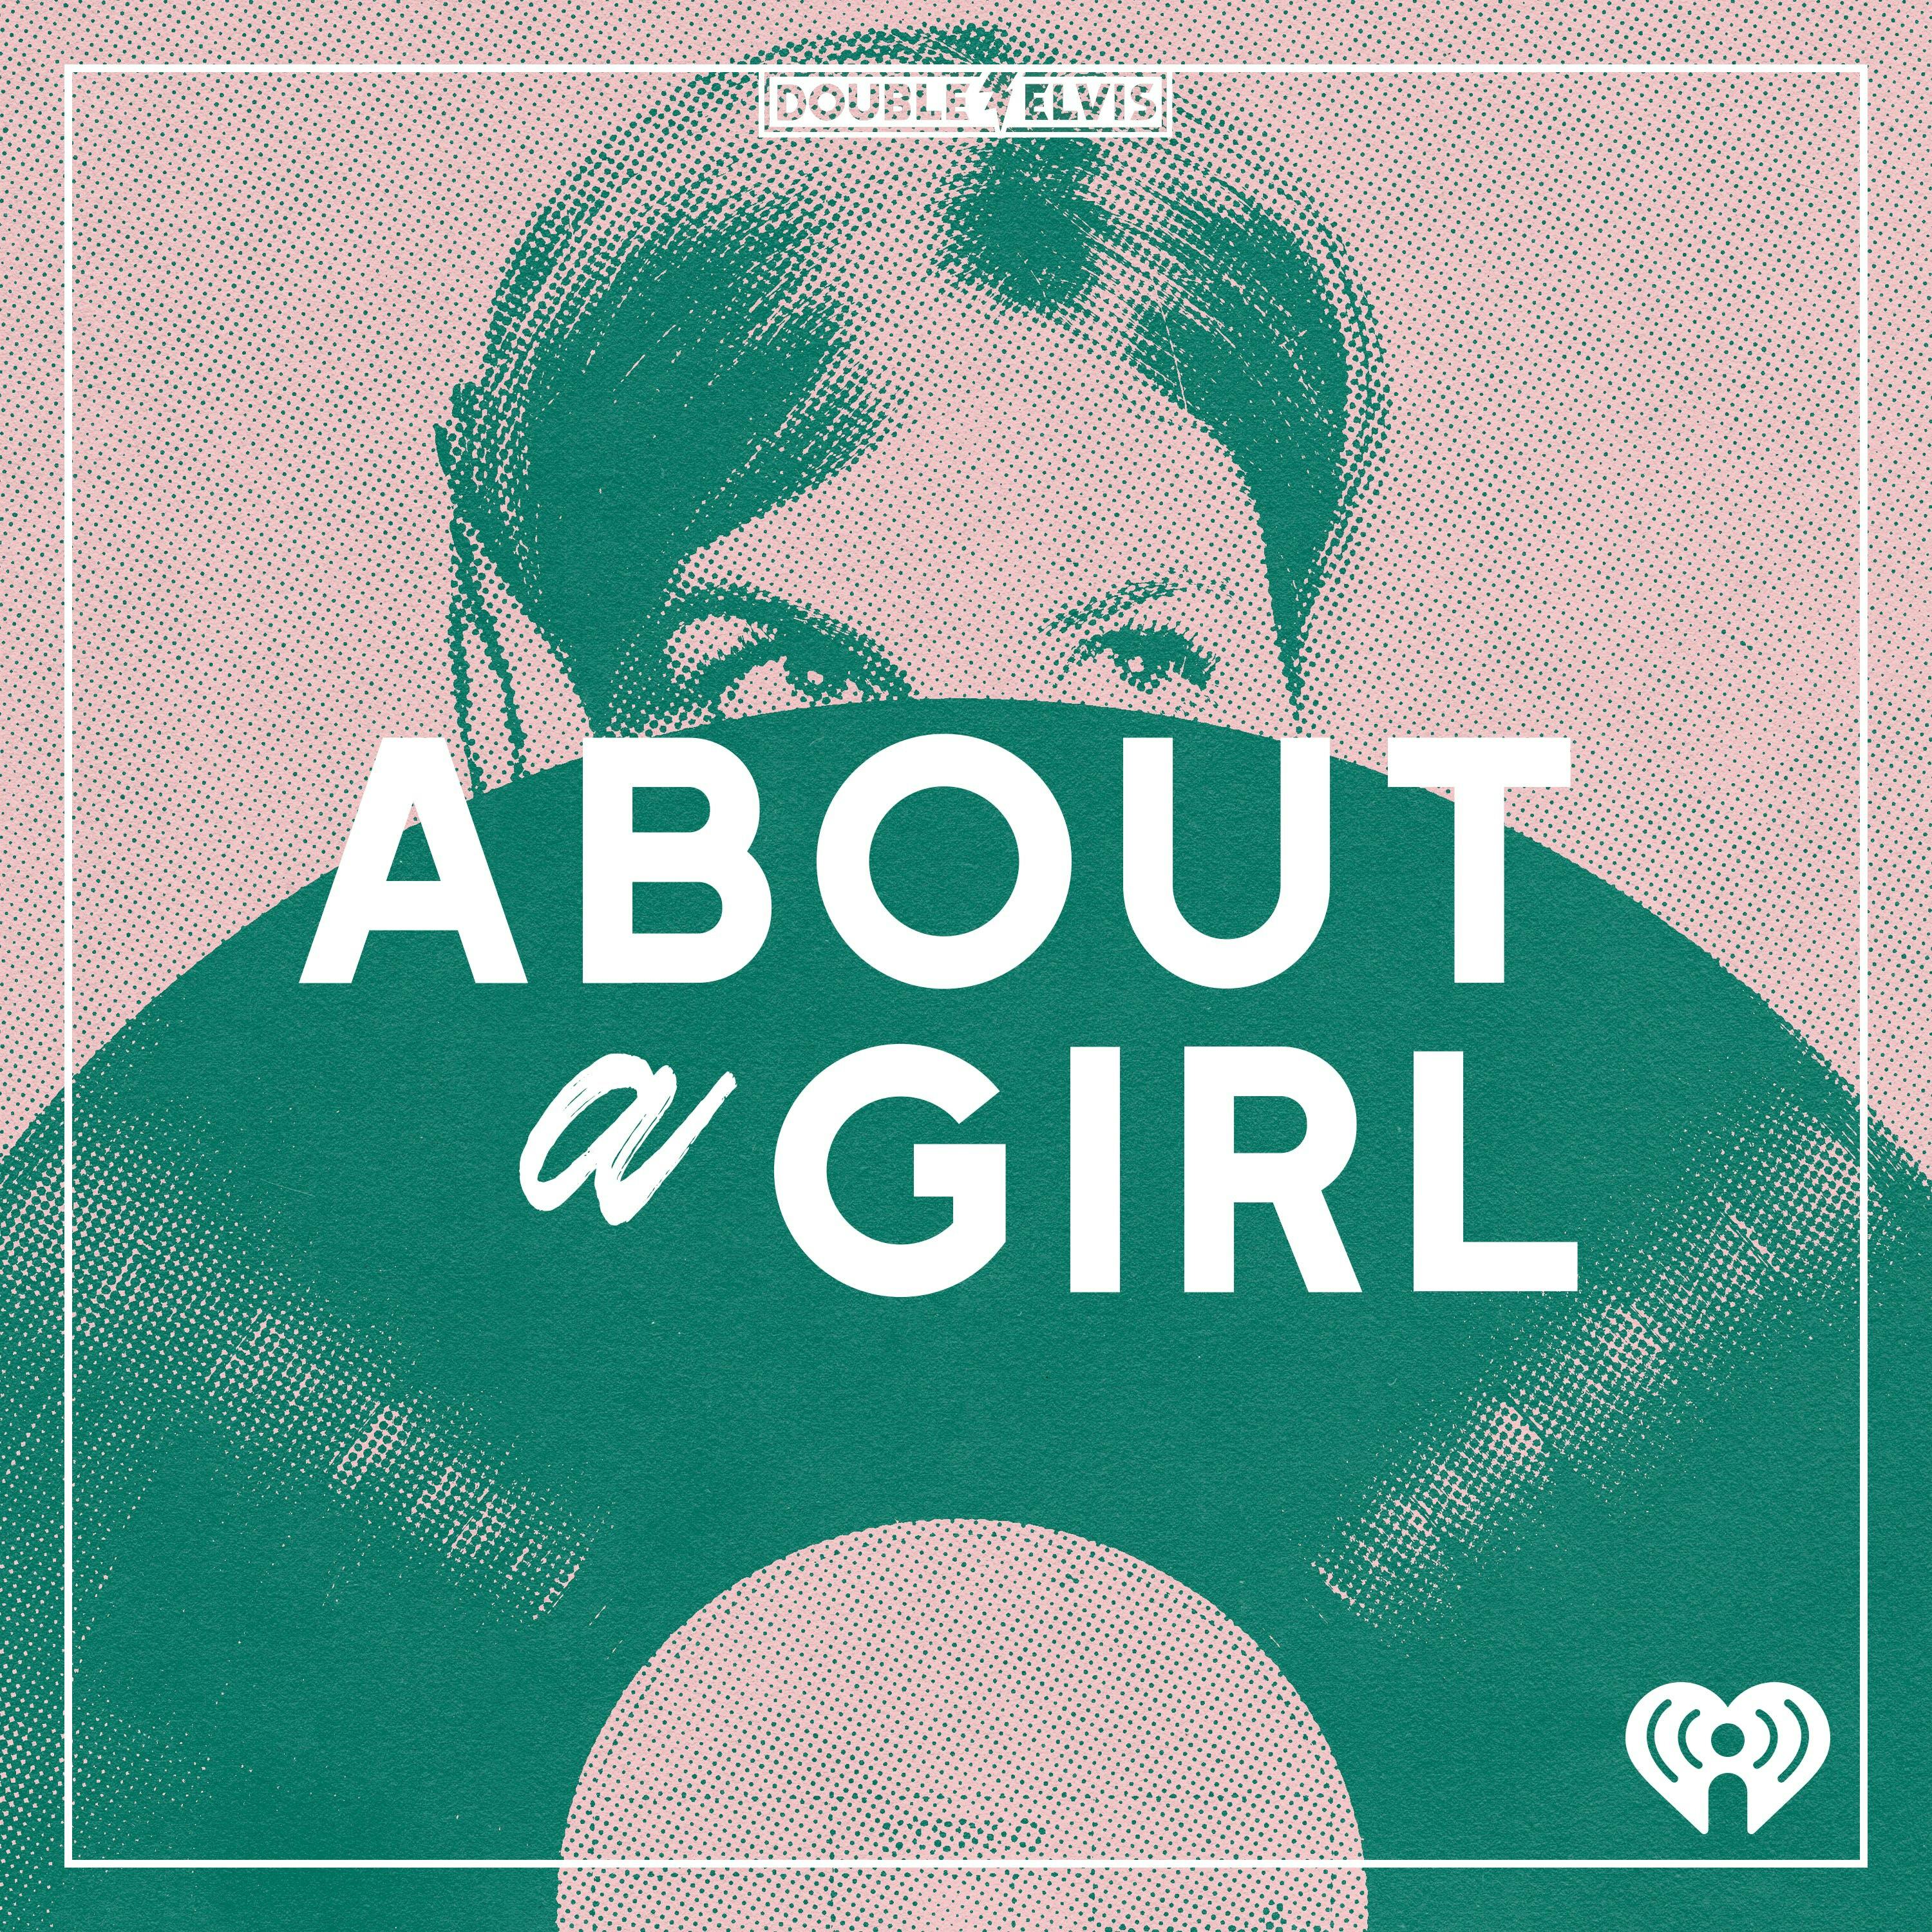 About A Girl:iHeartPodcasts and Double Elvis